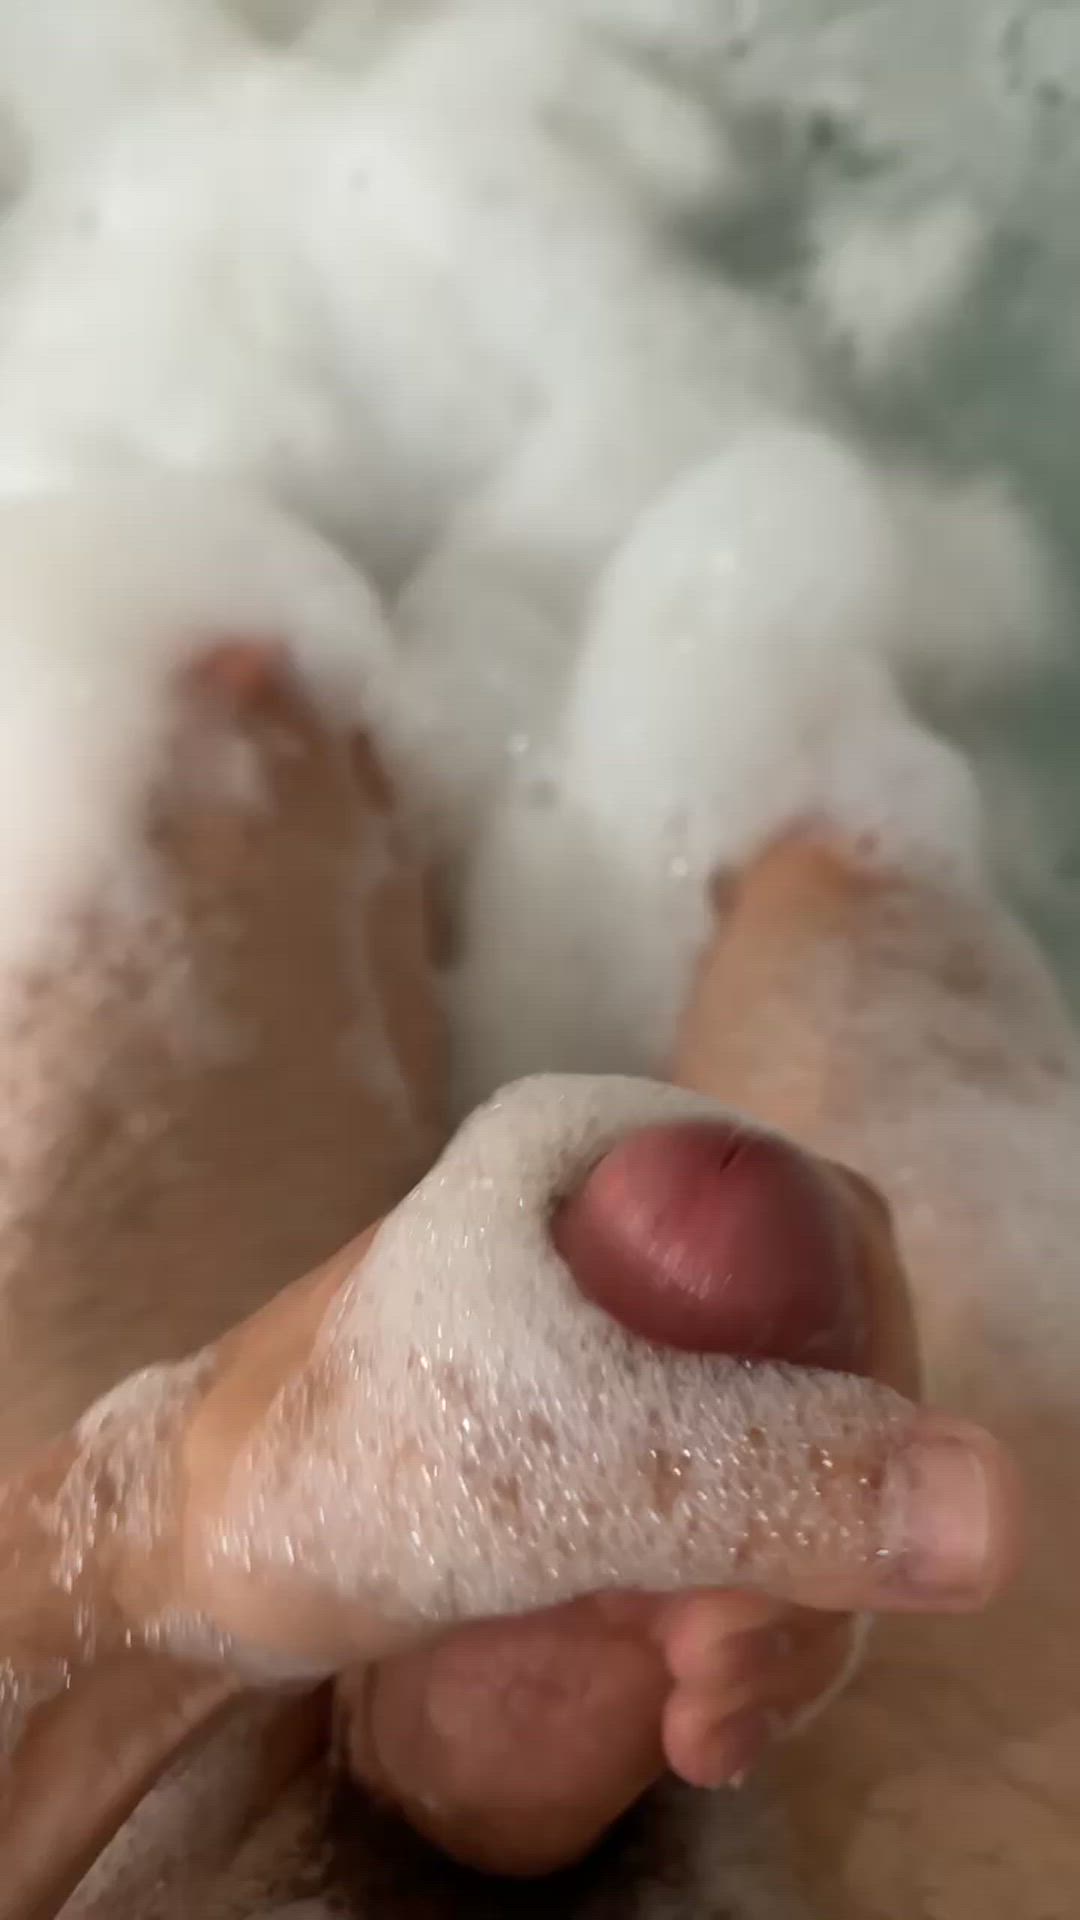 Cum porn video with onlyfans model lizzieandruben <strong>@lizzieandruben</strong>